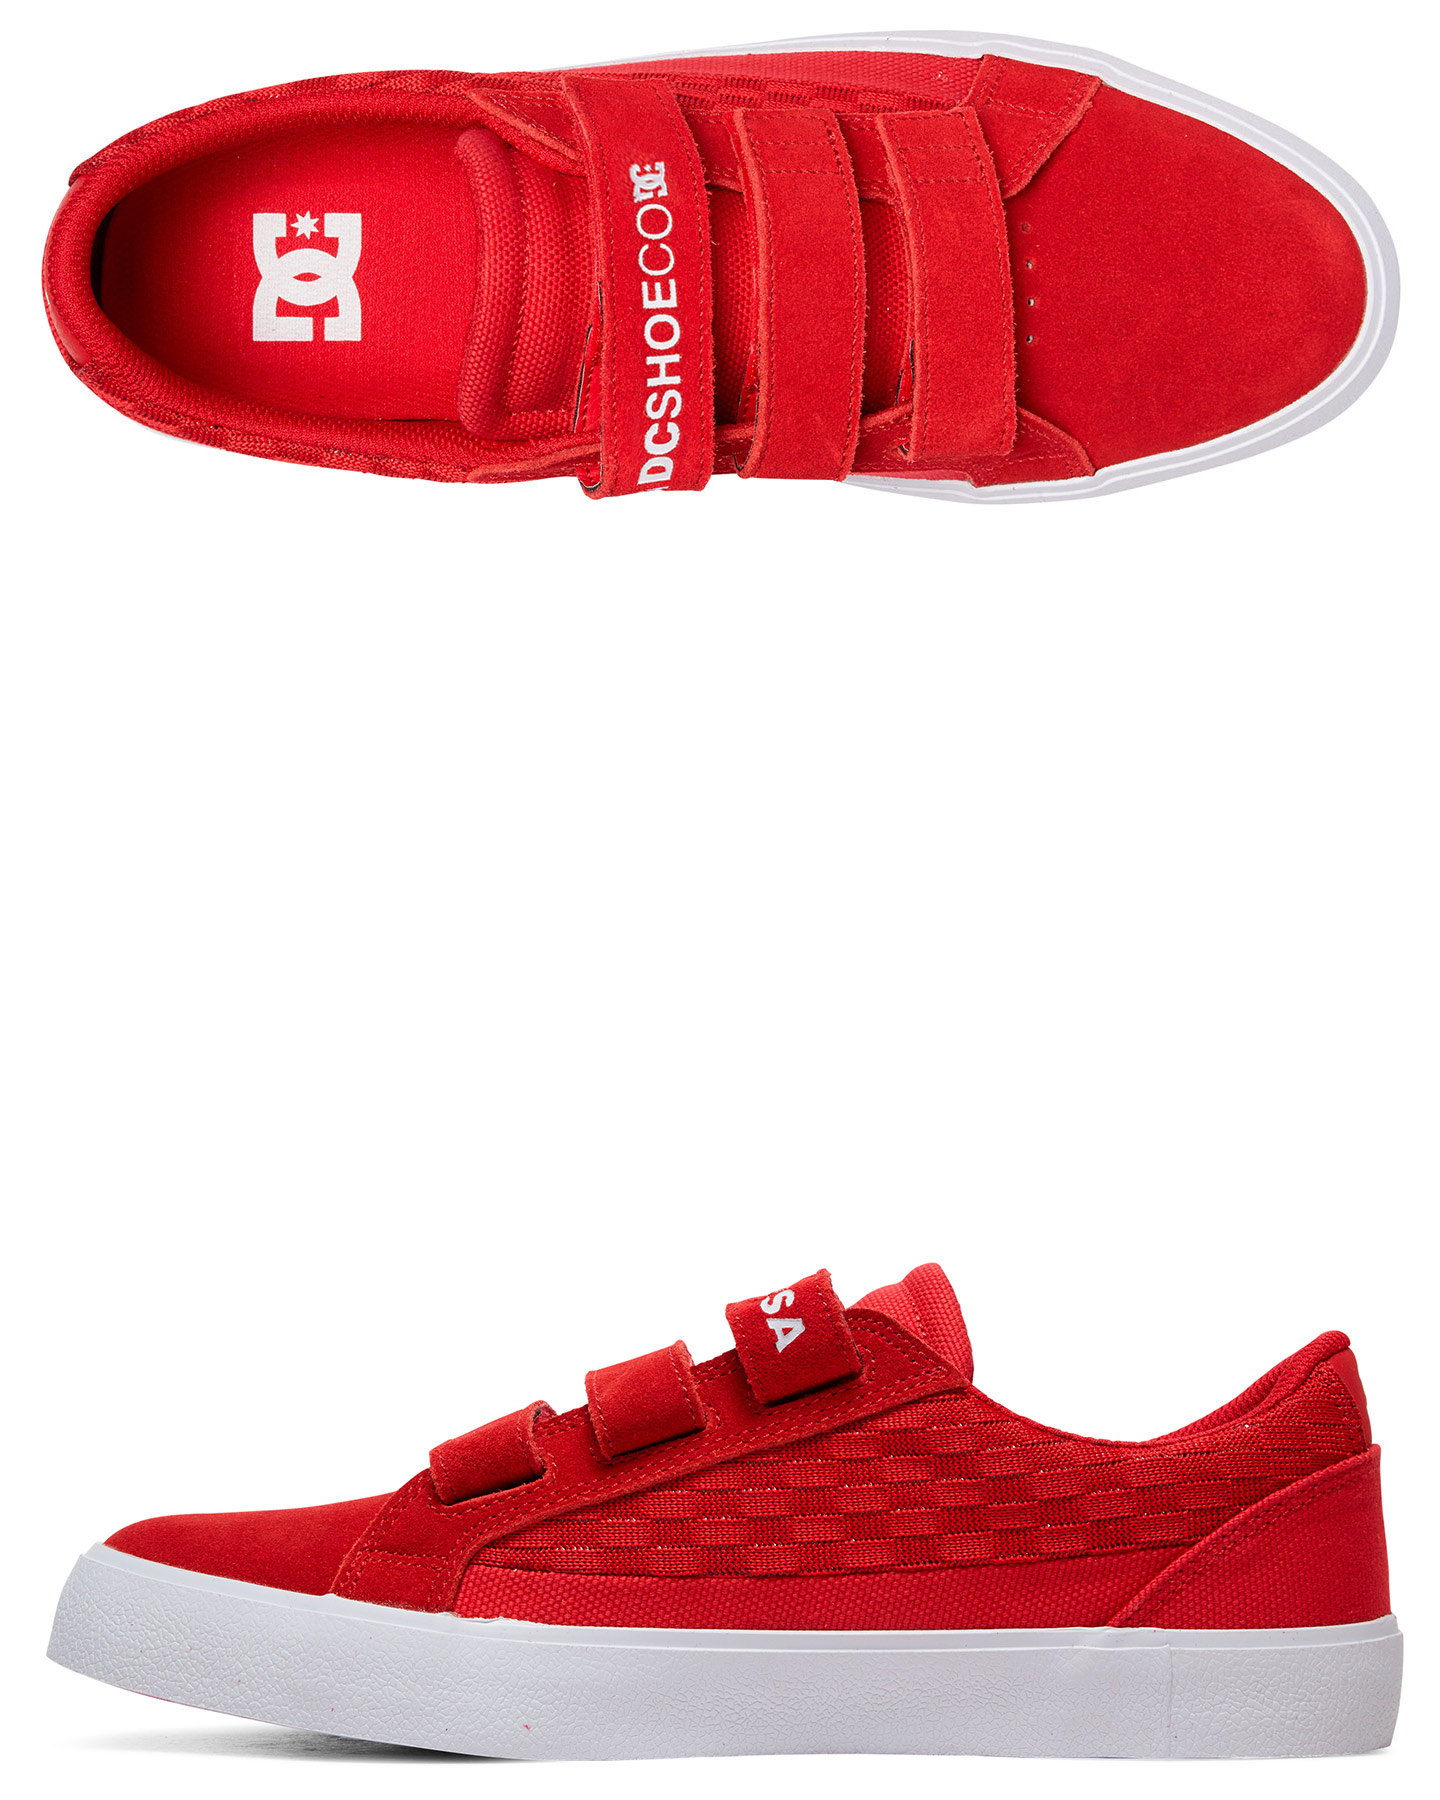 dc red shoes